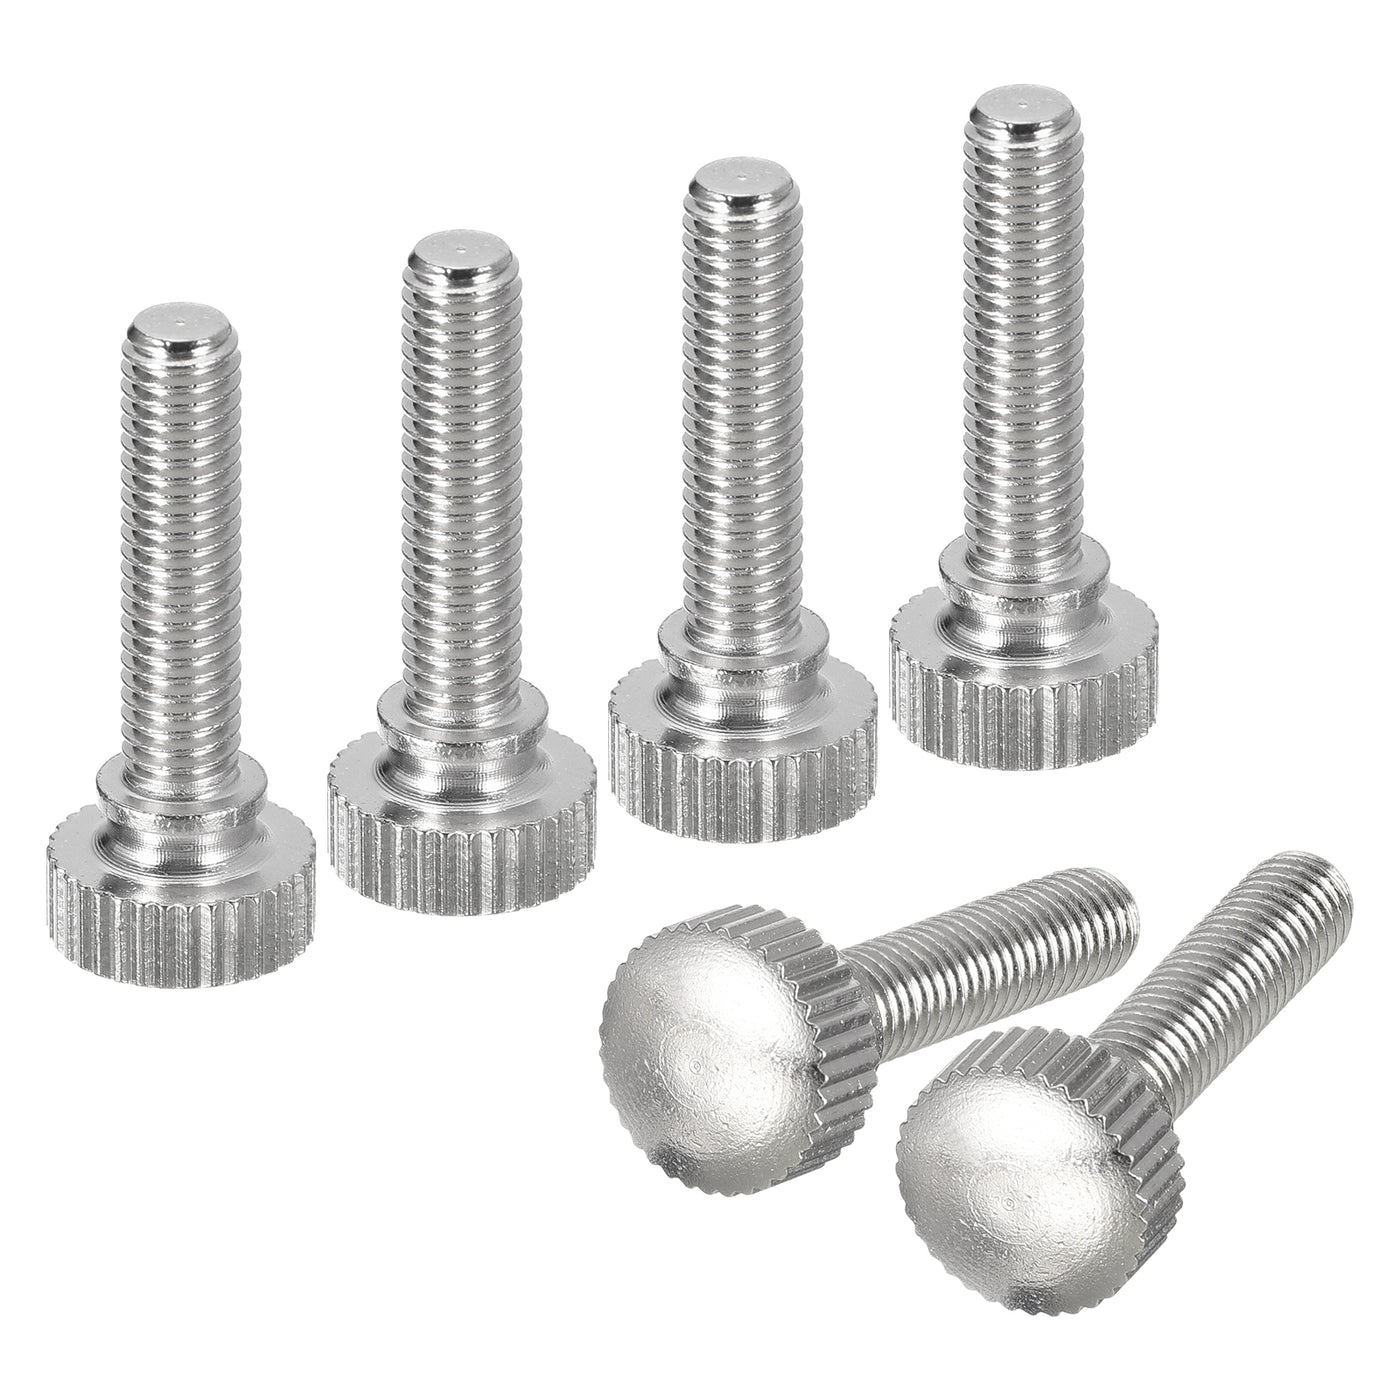 uxcell Uxcell M5x20mm Knurled Thumb Screws, 6pcs Brass Thumb Screws with Shoulder, Silver Tone